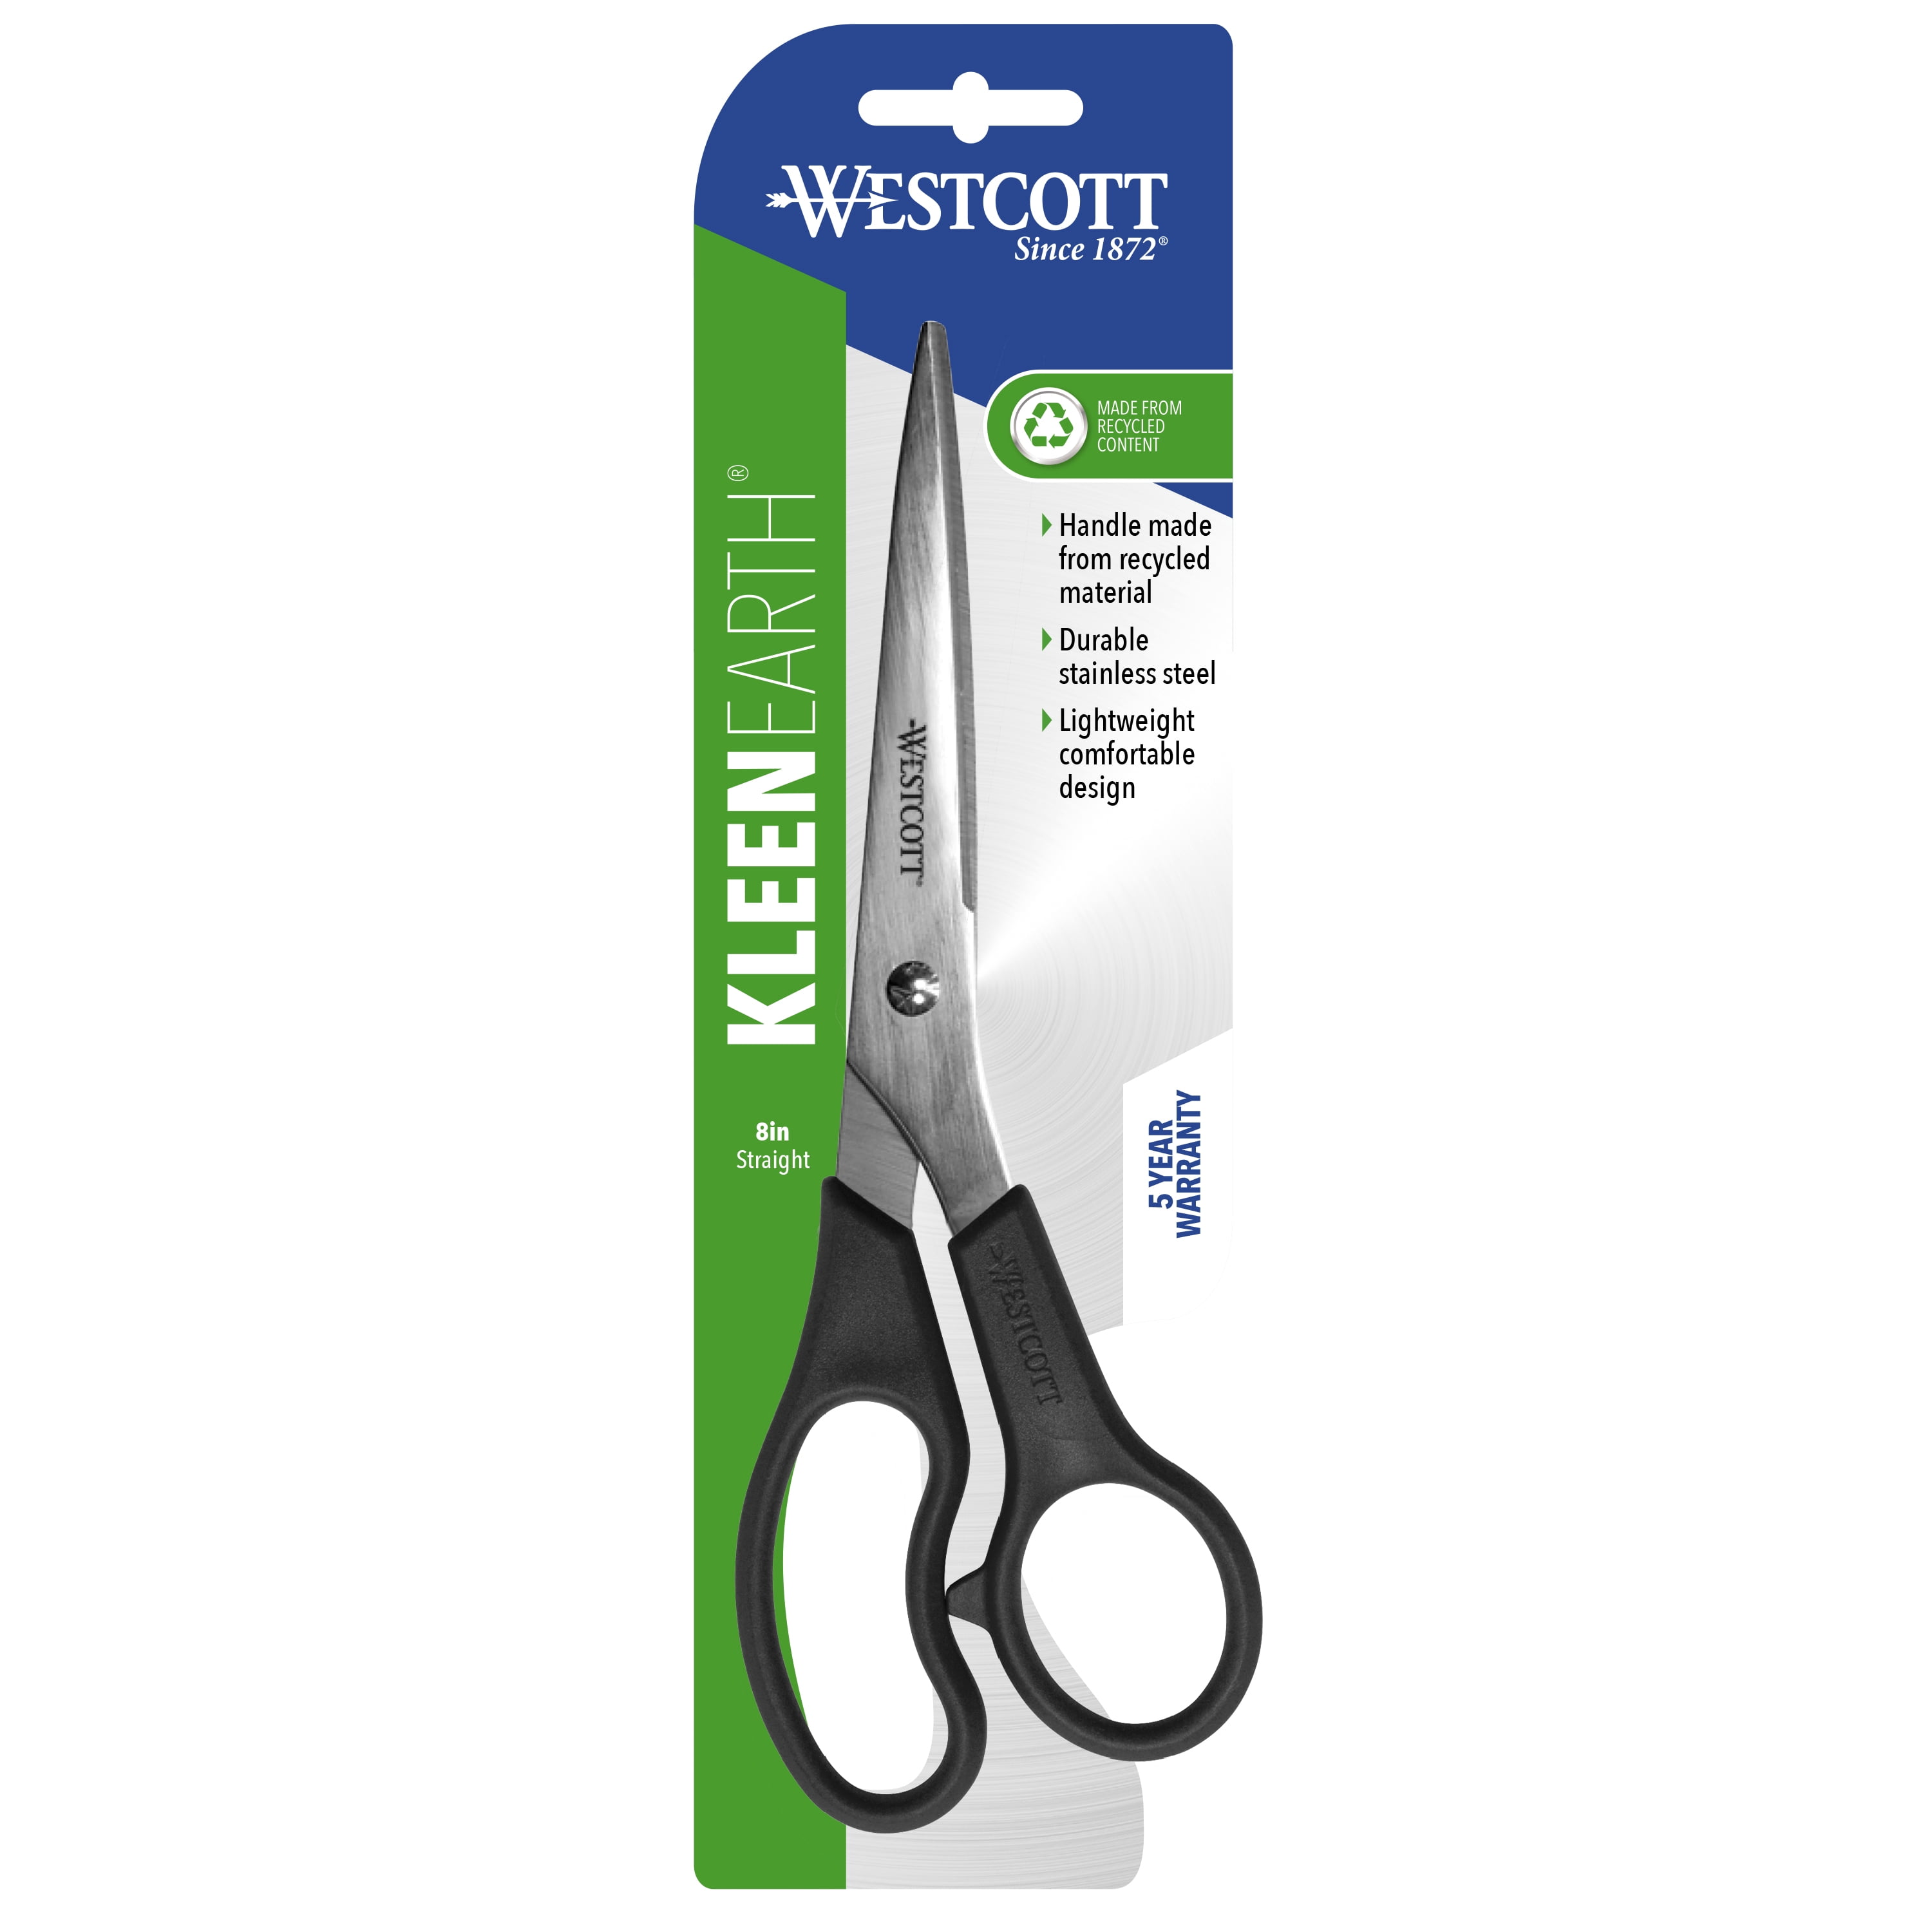 Westcott KleenEarth Recycled 8" Scissors, for Office, Black, 1-Count